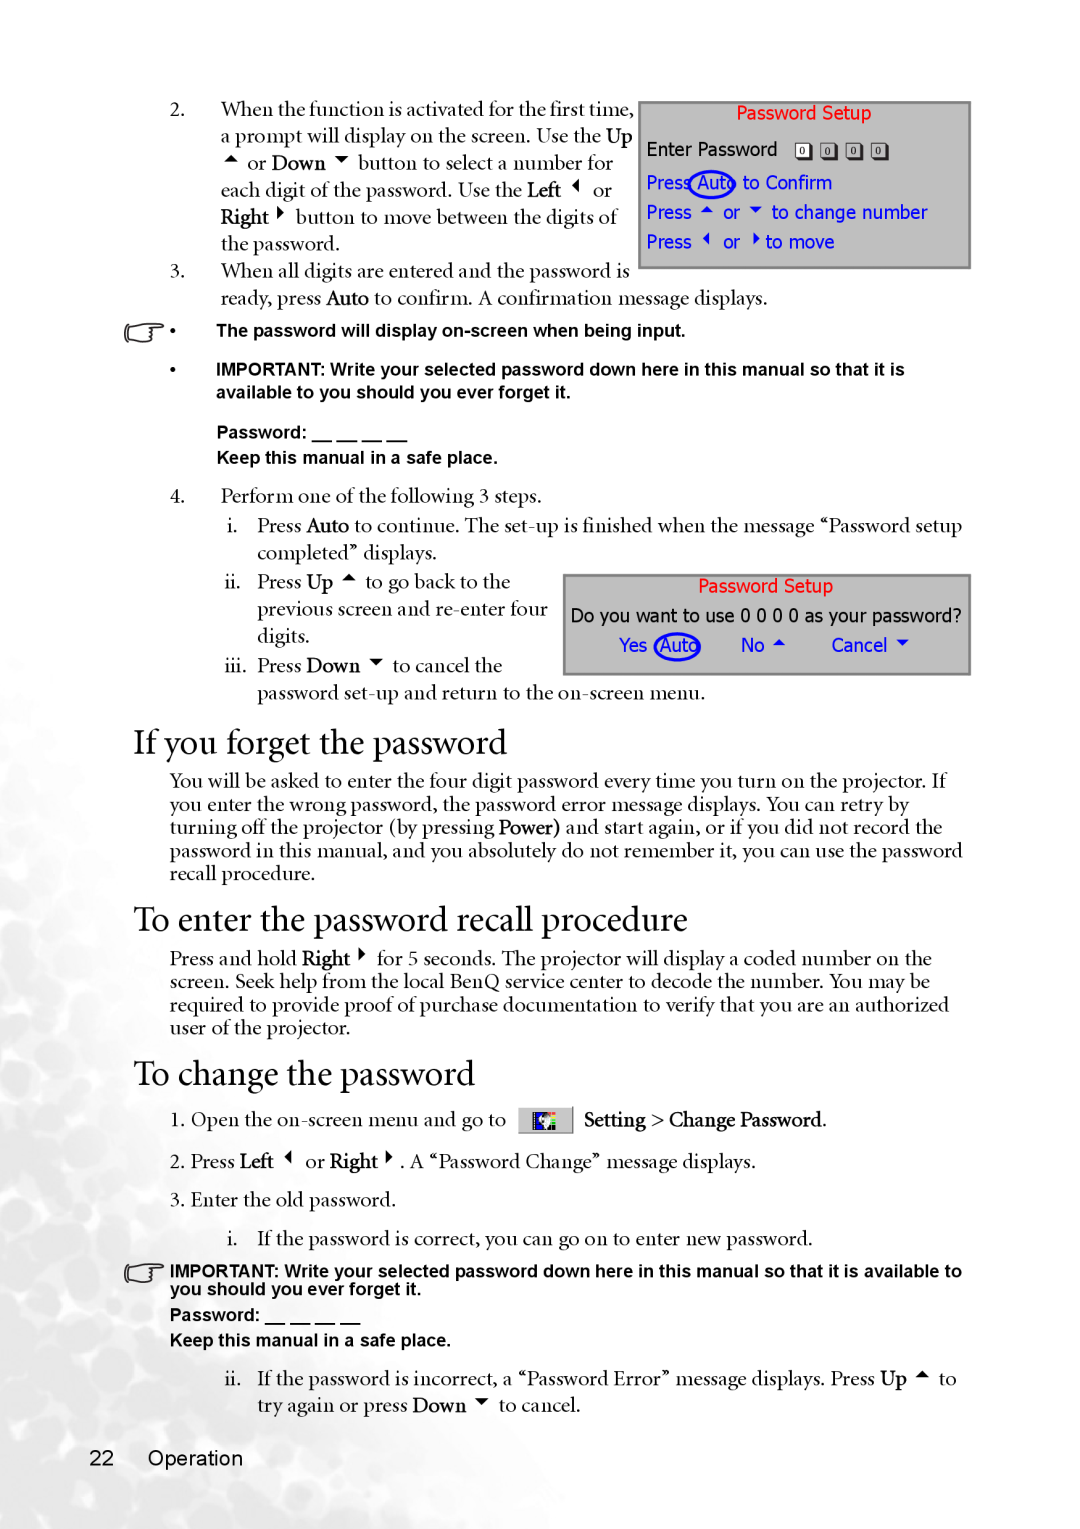 BenQ MP620p user manual If you forget the password, To enter the password recall procedure, To change the password 